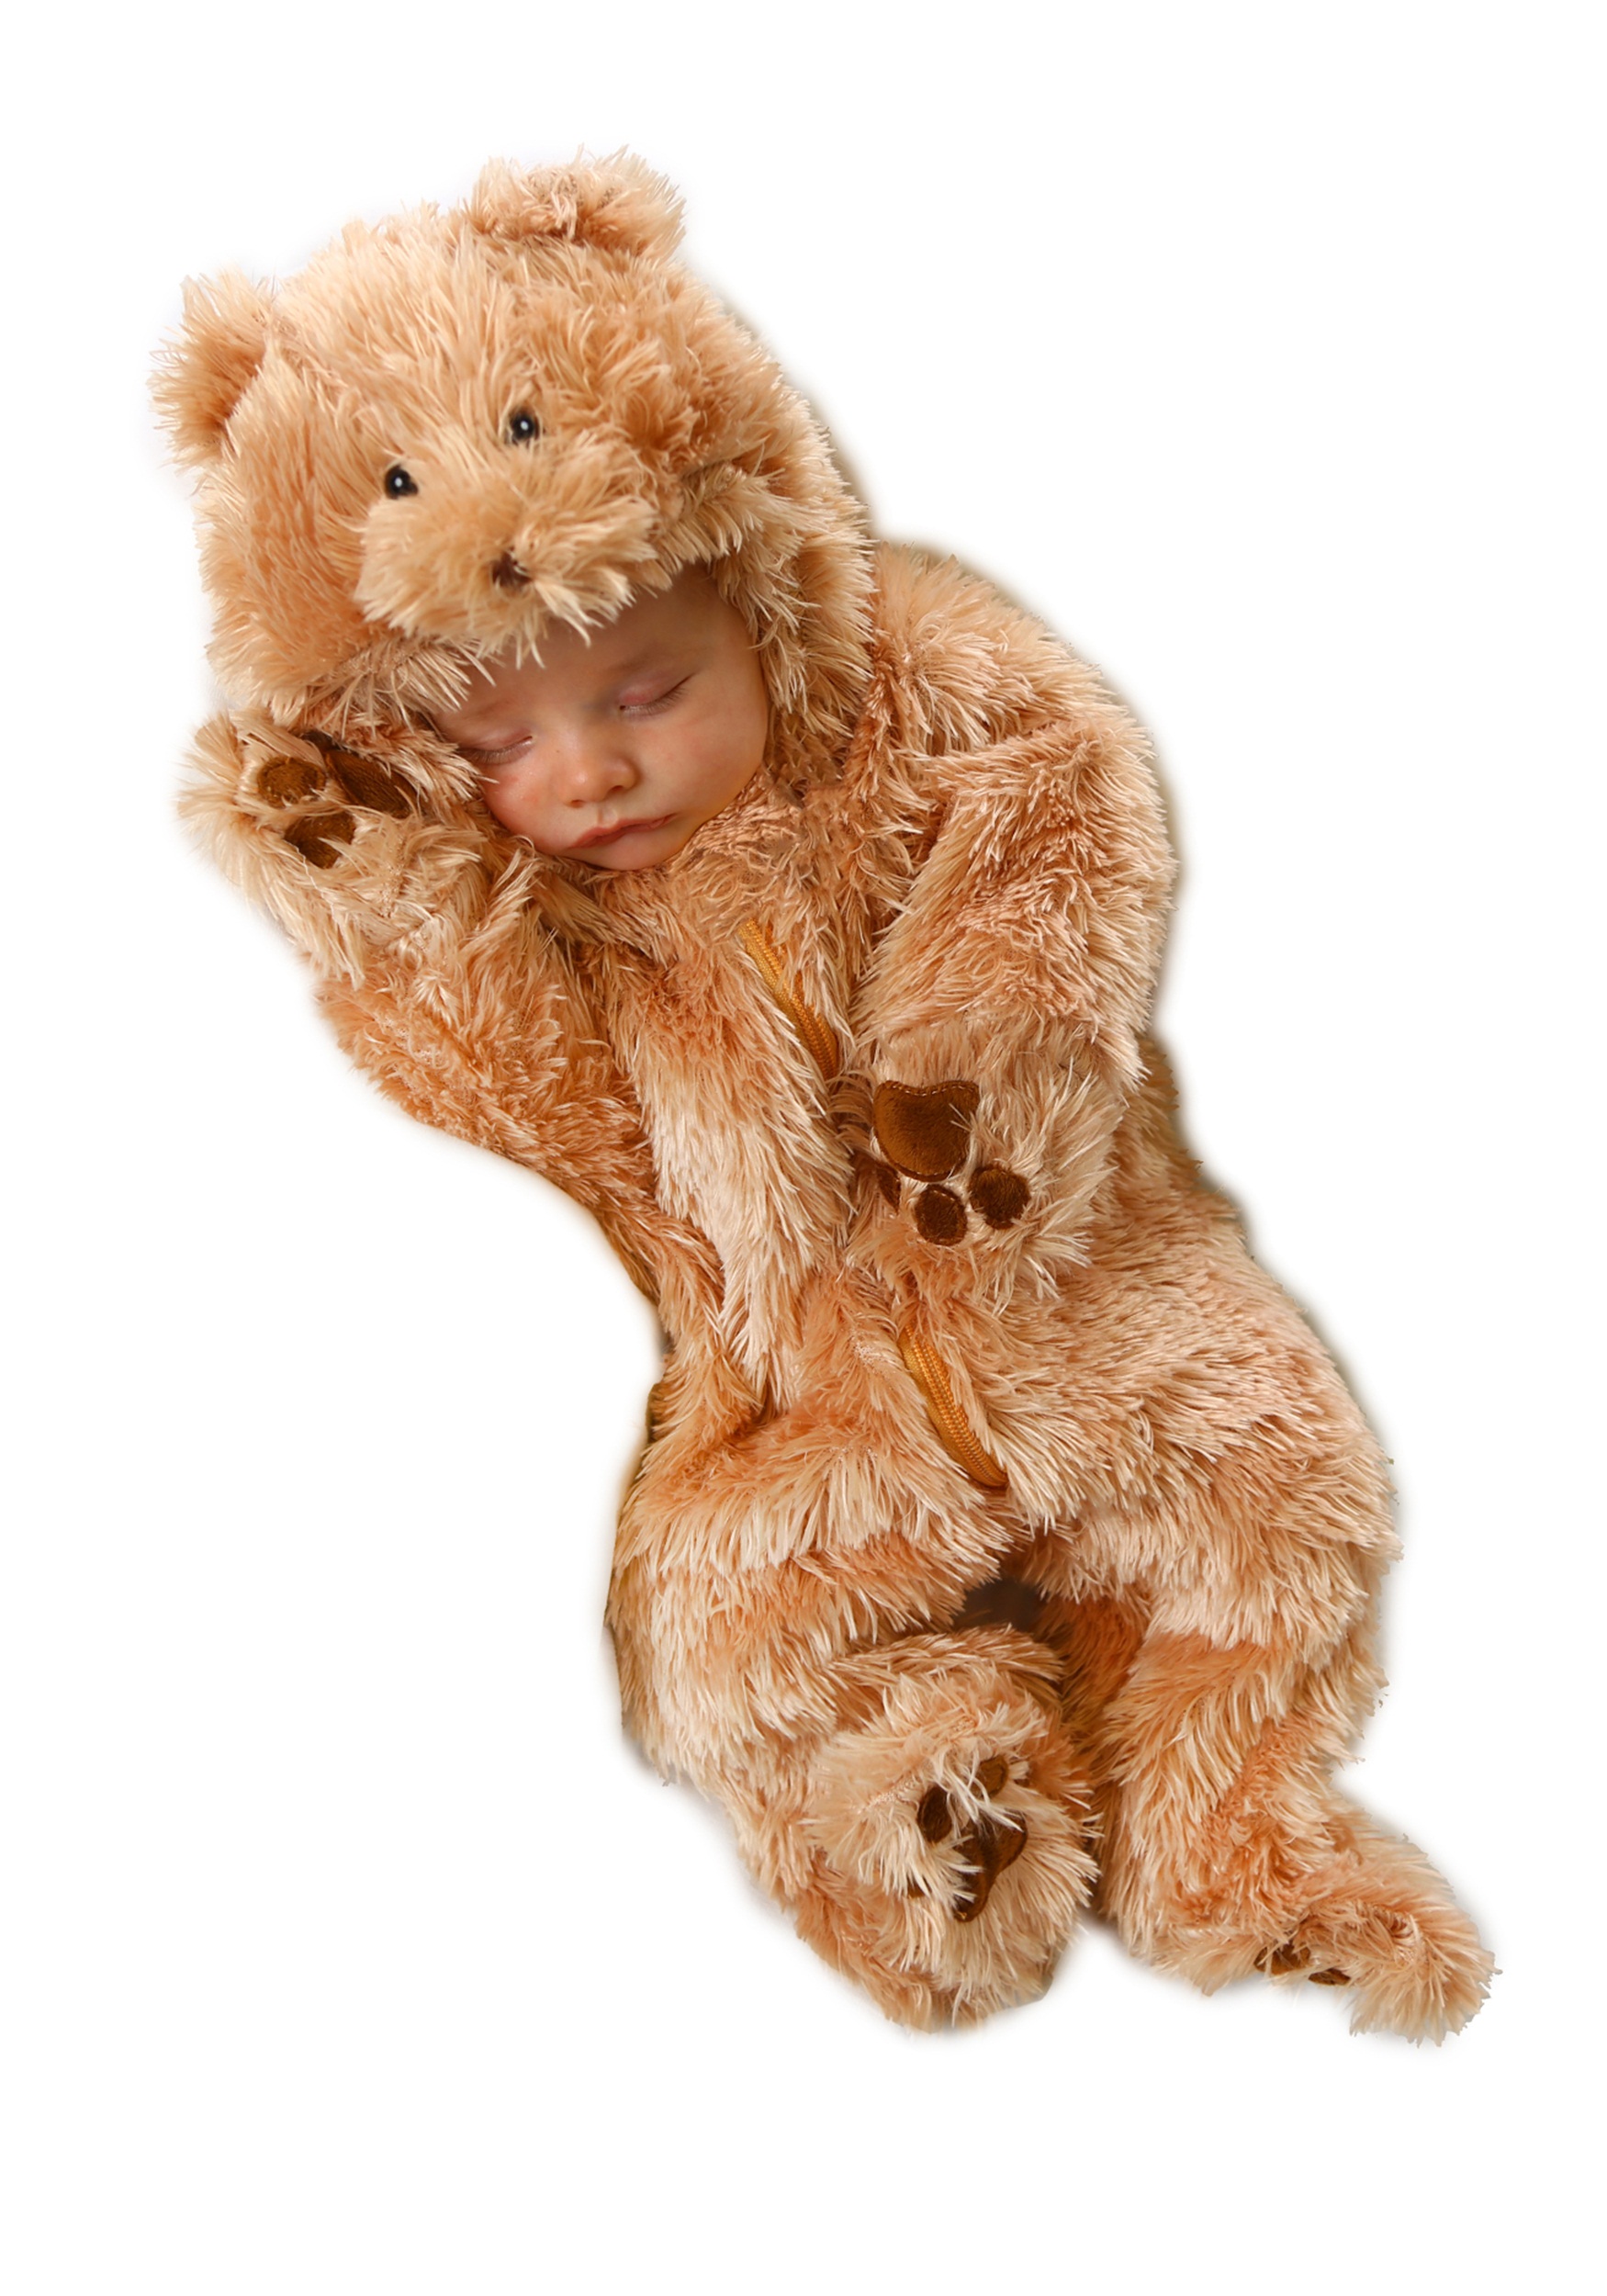 teddy bear suit for baby